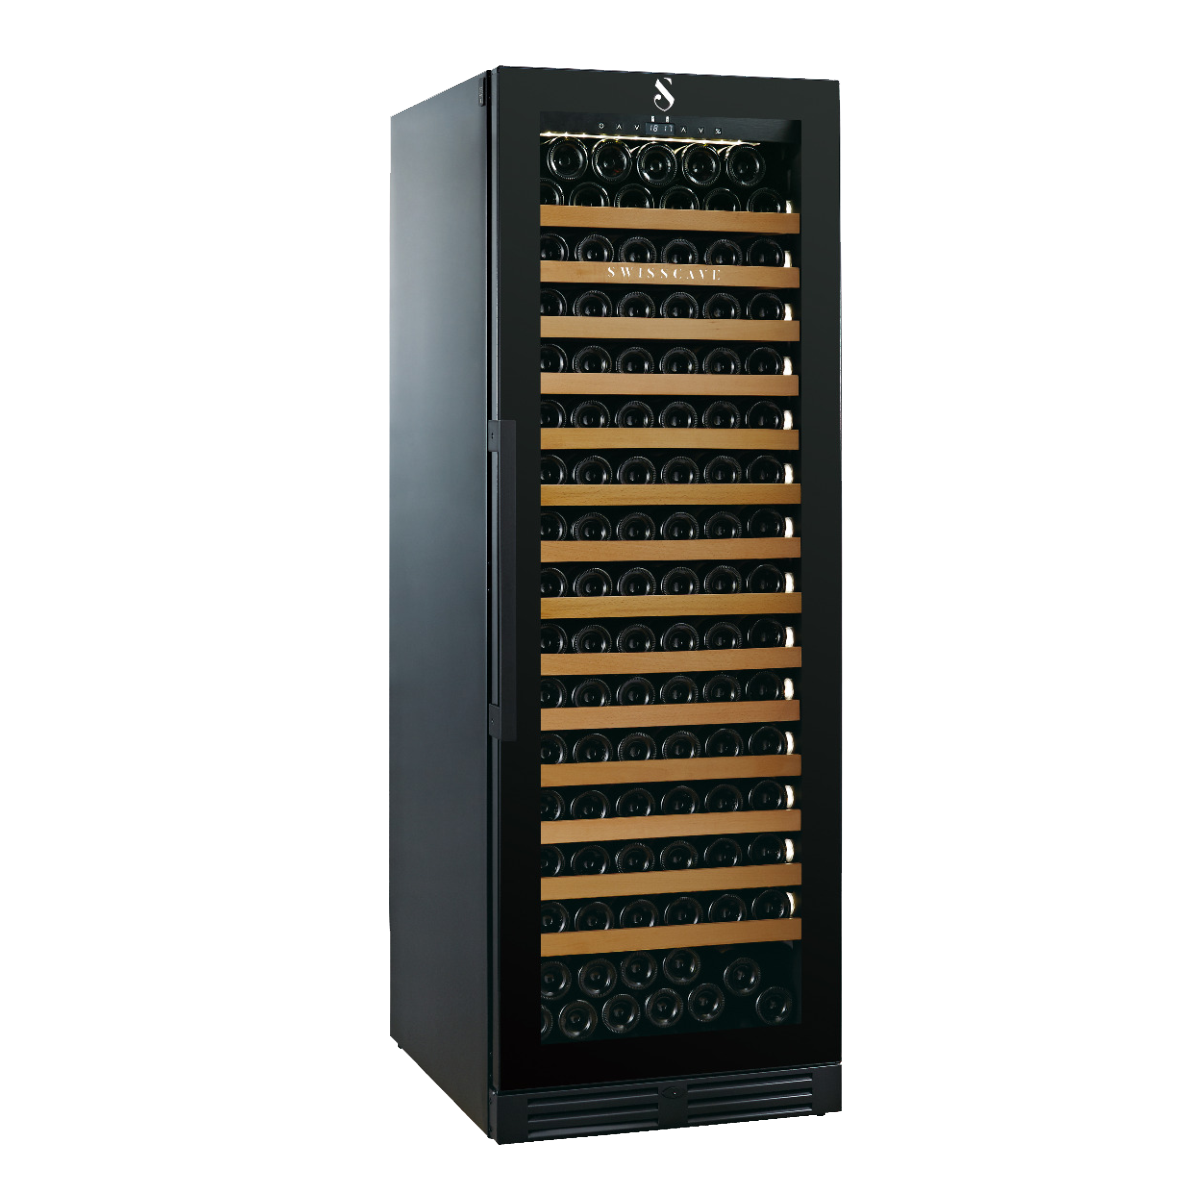 Swisscave WLB-460F-MIX - Black Edition Dual Zone Cabinet (163-175 BOTTLE) with smart Burgundy/ Bordeaux fitted shelving- 595mm Wide